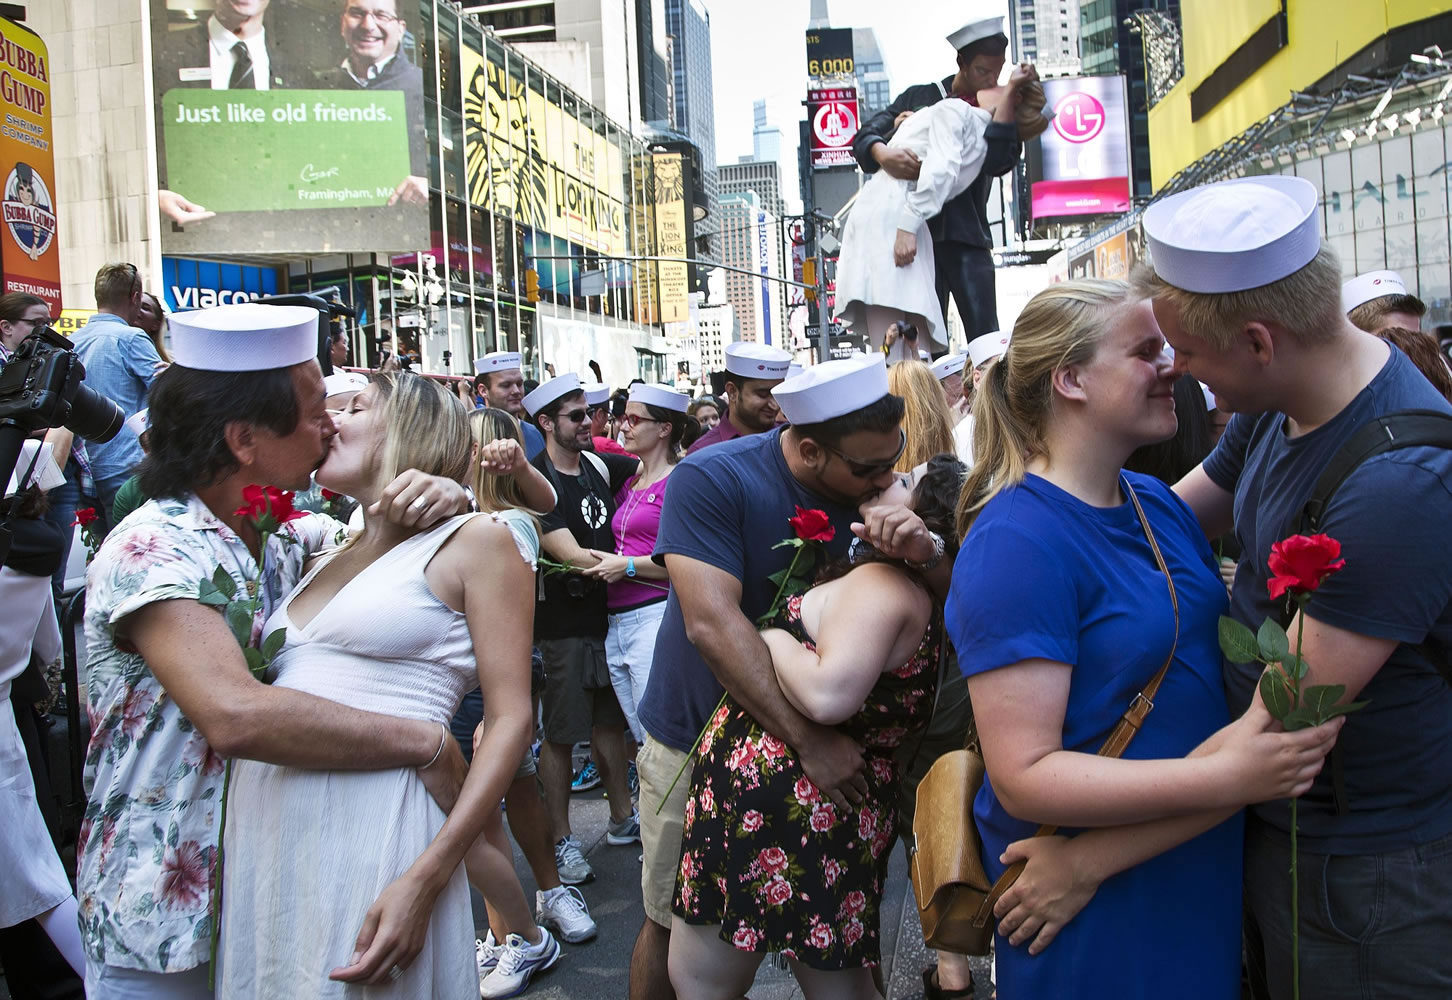 Kenji and Kristen Kawasaki, far left, join others as they re-enact the iconic 1945 Alfred Eisenstaedt kiss photo on Friday in New York's Times Square.